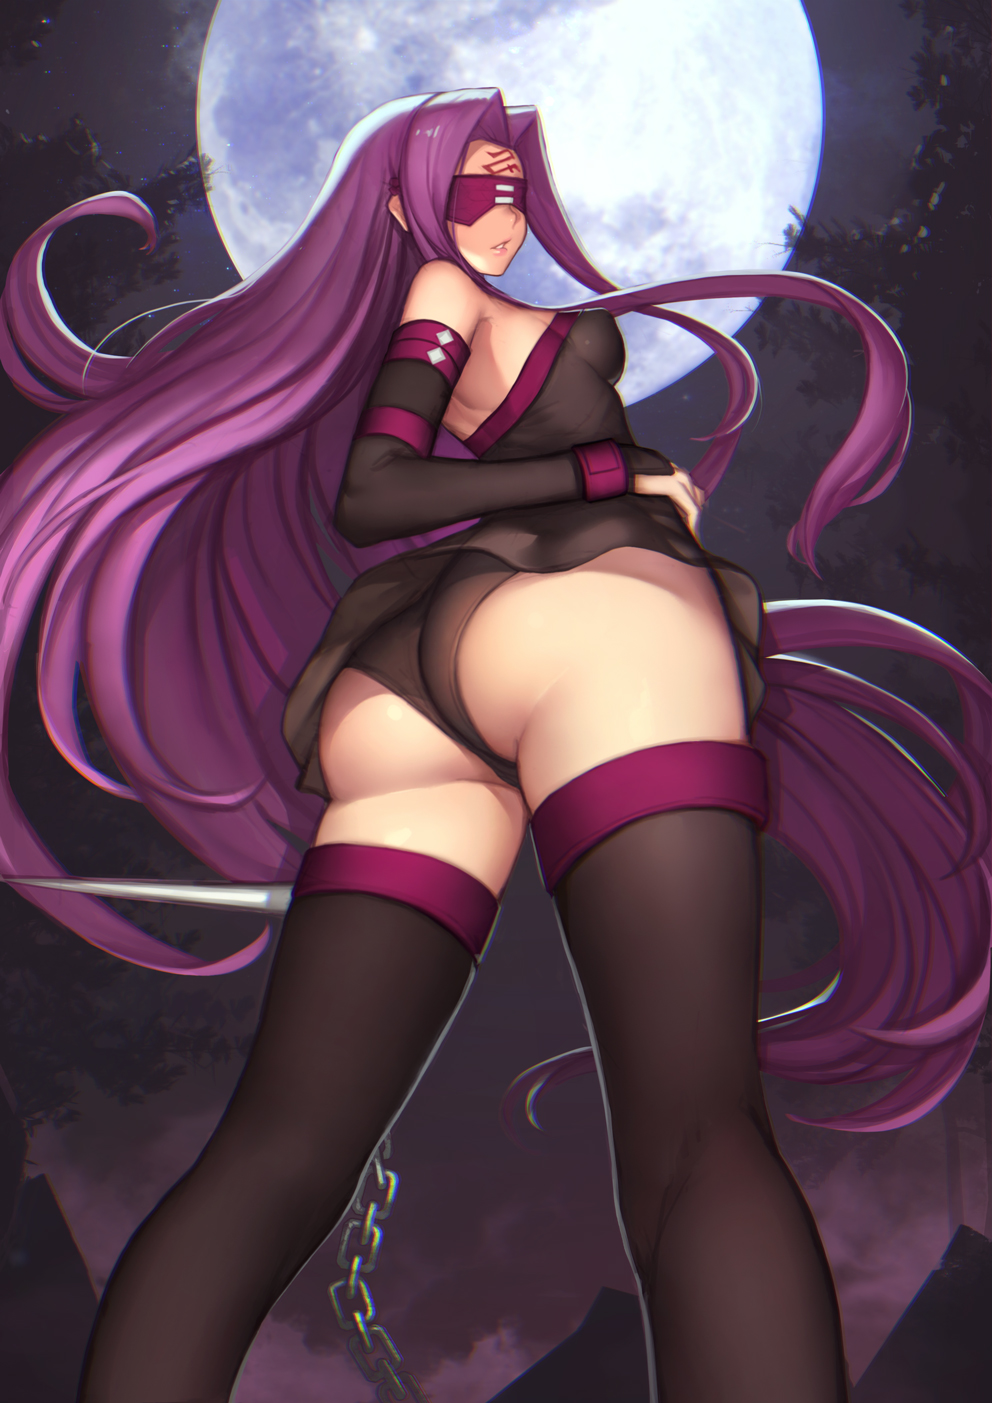 Anime 992x1403 Fate series Fate/Grand Order Fate/Stay Night fate/stay night: heaven's feel thighs underbutt sideboob black boots long sleeves dagger thigh high boots long hair purple hair anime girls Rider (Fate/Stay Night) bare shoulders no bra moonlight night black legwear night sky portrait display blindfold black panties Evan Fang low-angle fan art 2D anime ecchi looking below